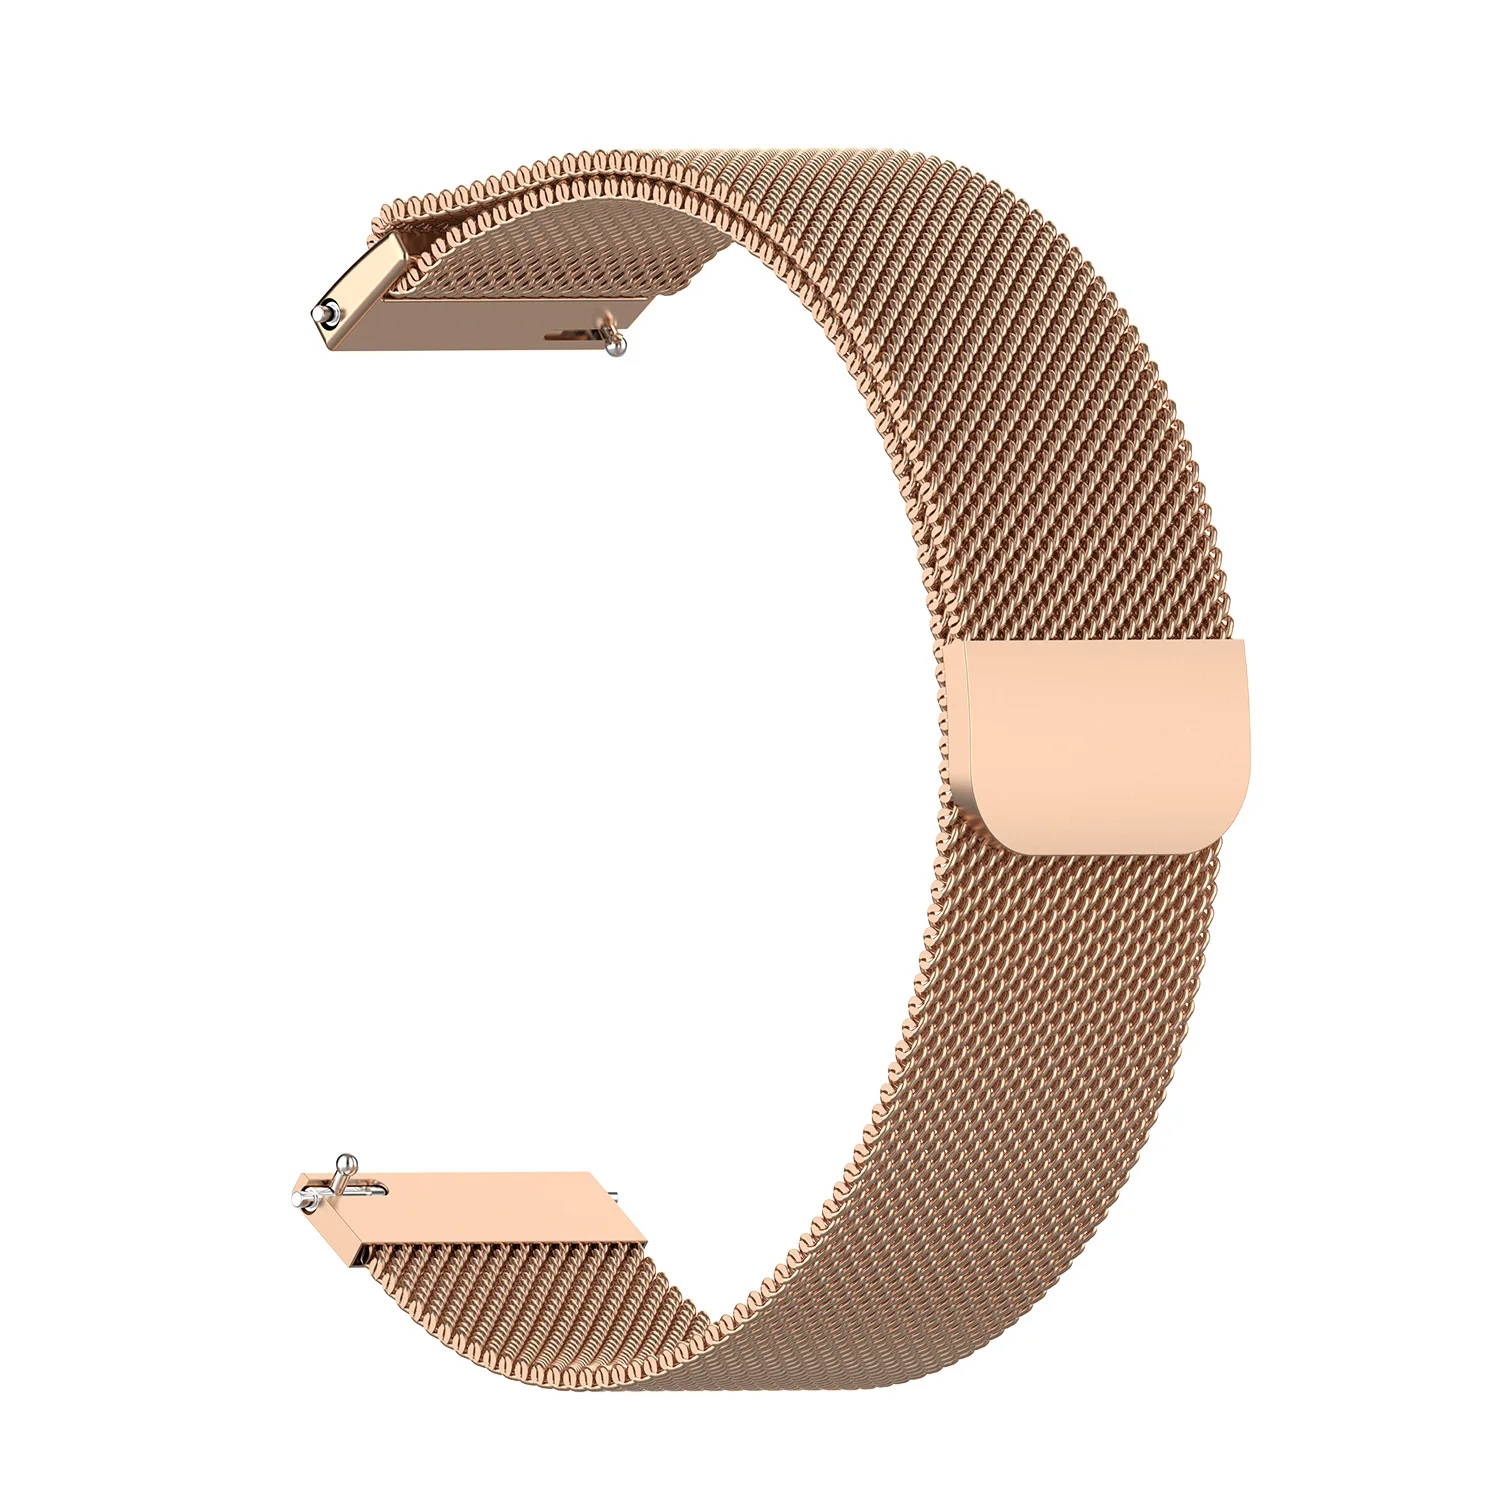 

20mm 22mm Magnetic Milanese Loop Watch Band for Samsung Galaxy Watch 3 S3 Active Stainless Steel Wrist Strap for Fitbit Versa